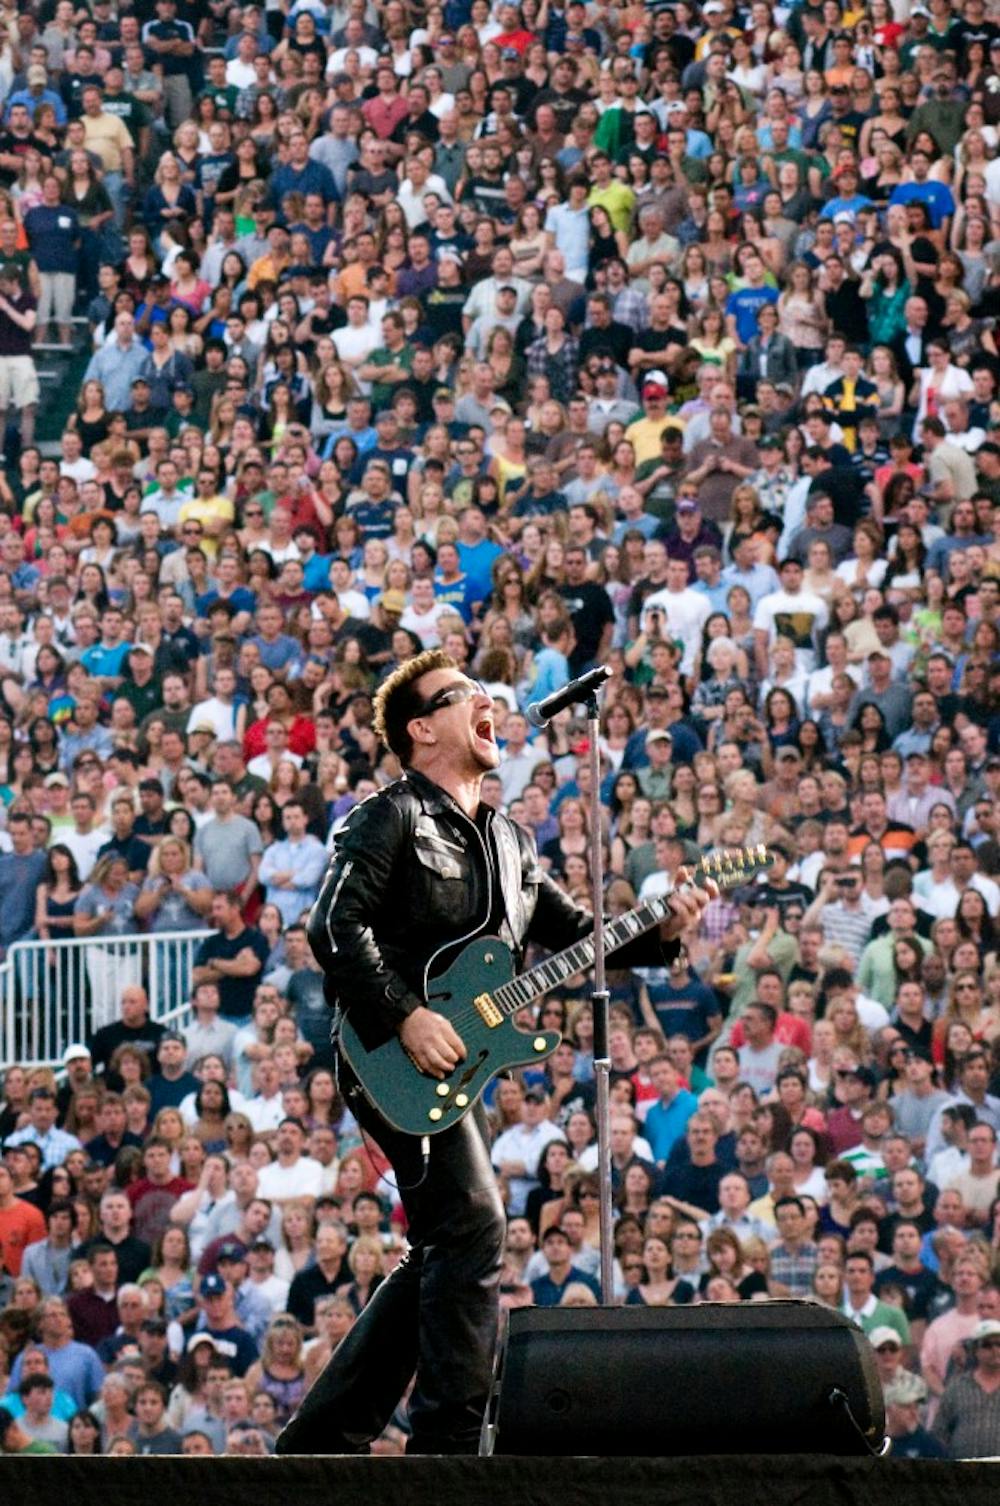 Rock and roll supergroup U2 performs to a packed house Sunday evening at Spartan Stadium. The band was initially supposed to stop in East Lansing last year for the U2 360? tour, but were forced to postpone after lead singer Bono needed time to recover from back surgery. State News File Photo